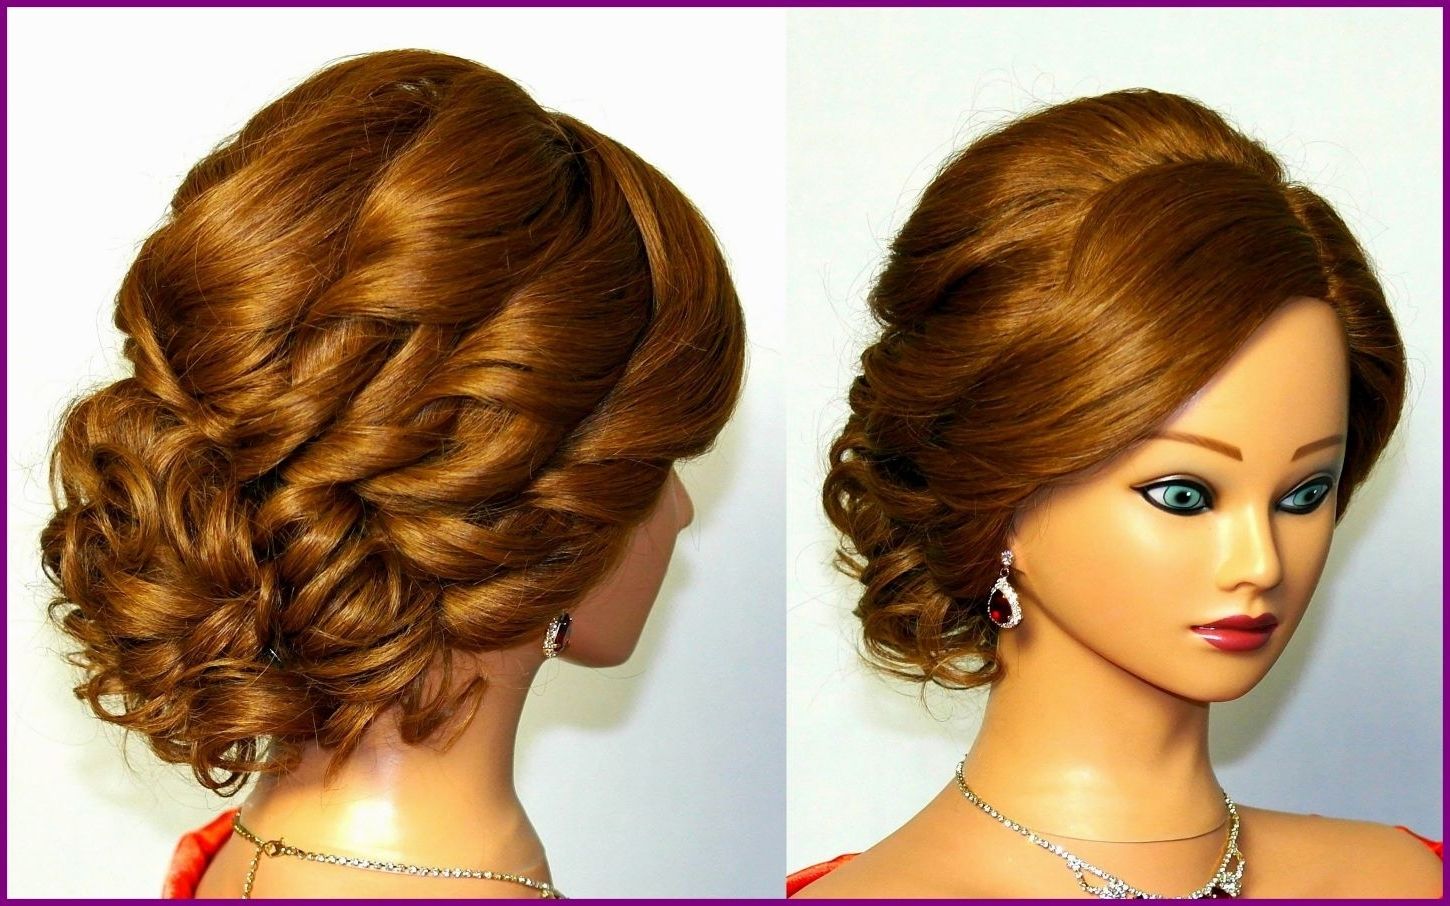 Inspiring Fancy Updos For Long Curly Hair Fashionables Image With Regard To Wavy Hair Updo Hairstyles (View 10 of 15)